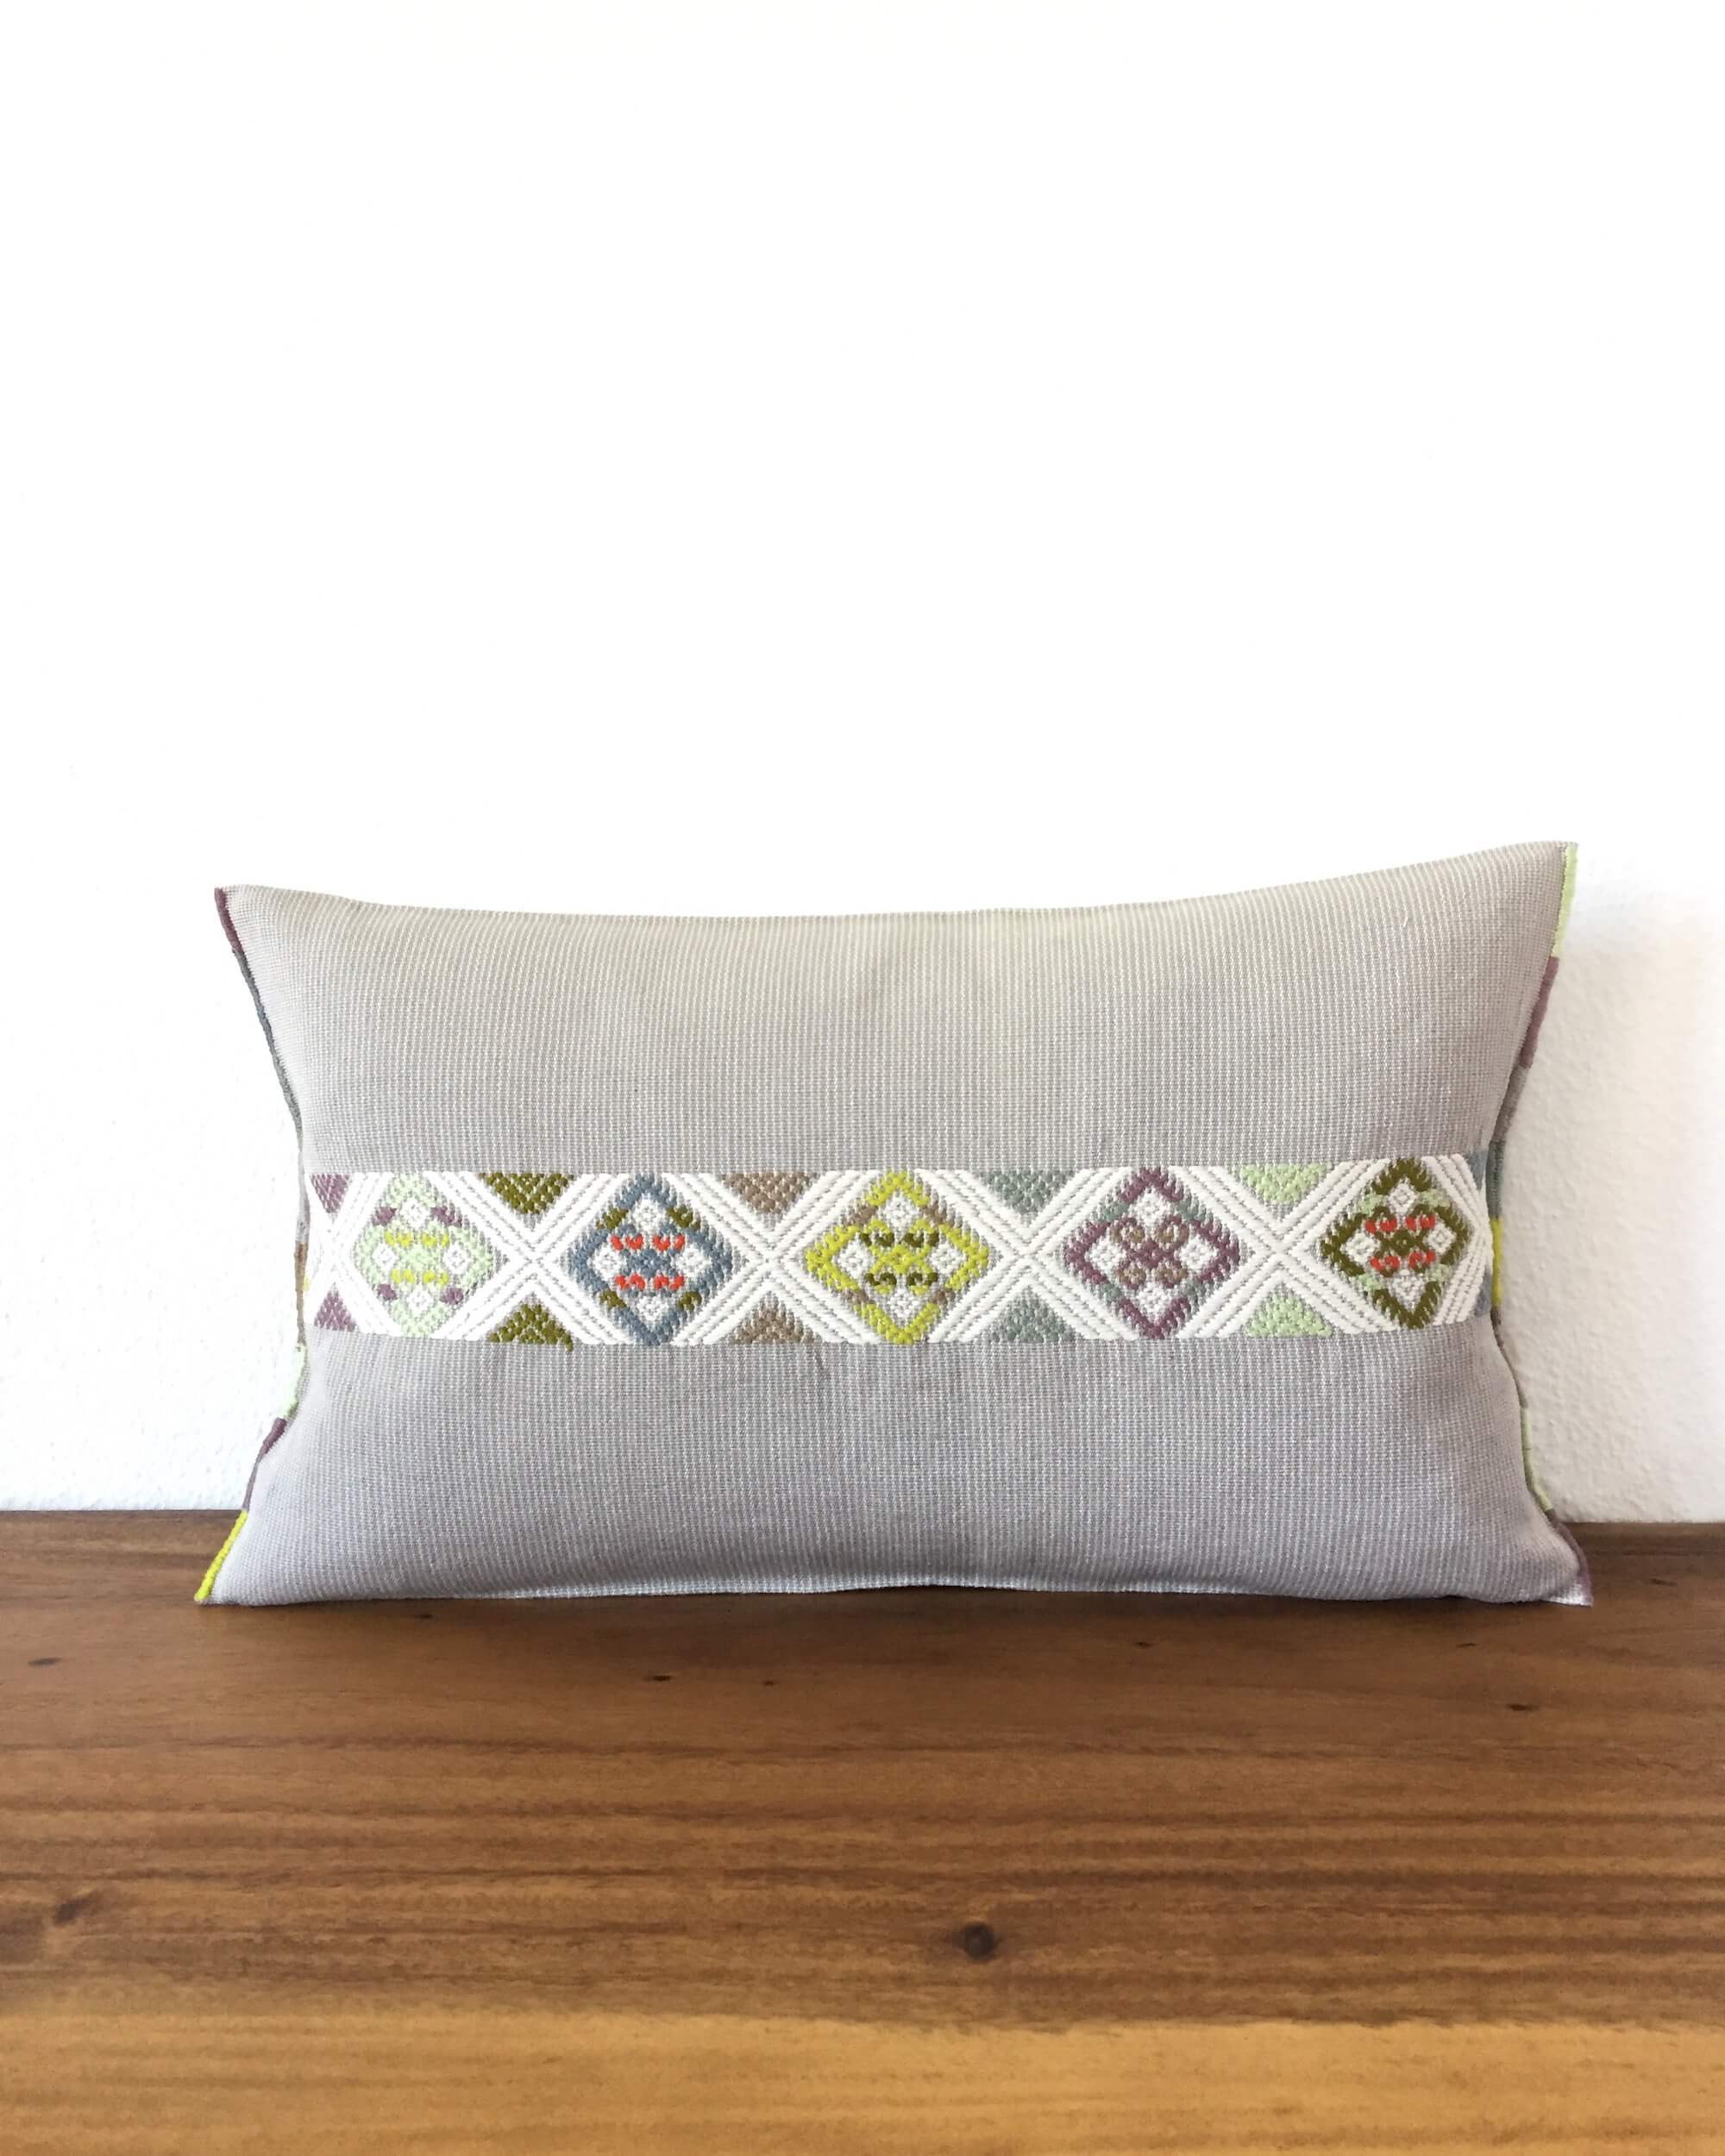 Throw Pillow grey with artisan details by Colorindio